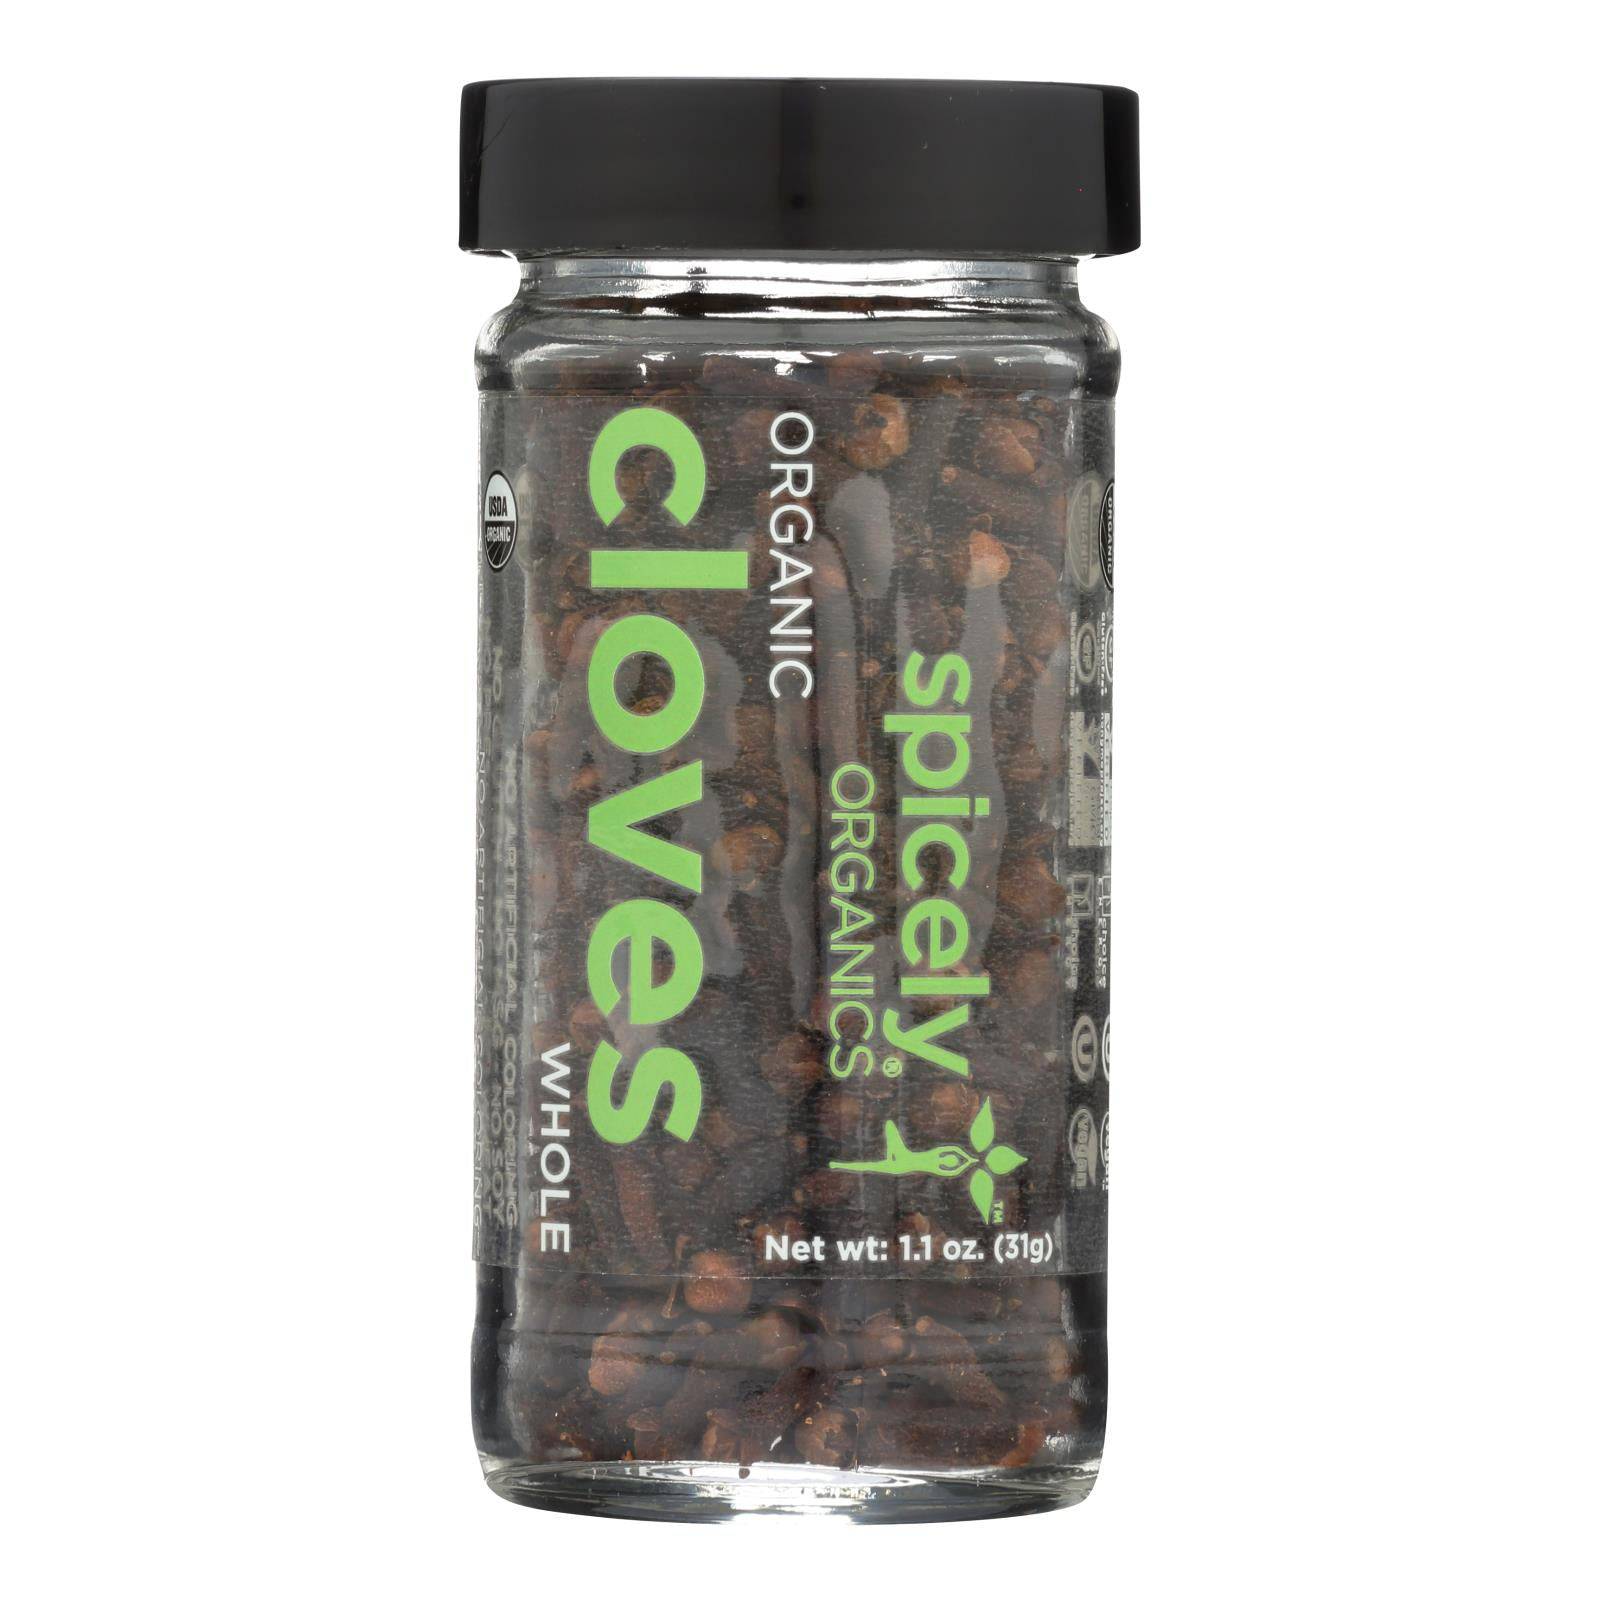 Spicely Organics - Organic Cloves - Whole - Case Of 3 - 1.1 Oz. | OnlyNaturals.us